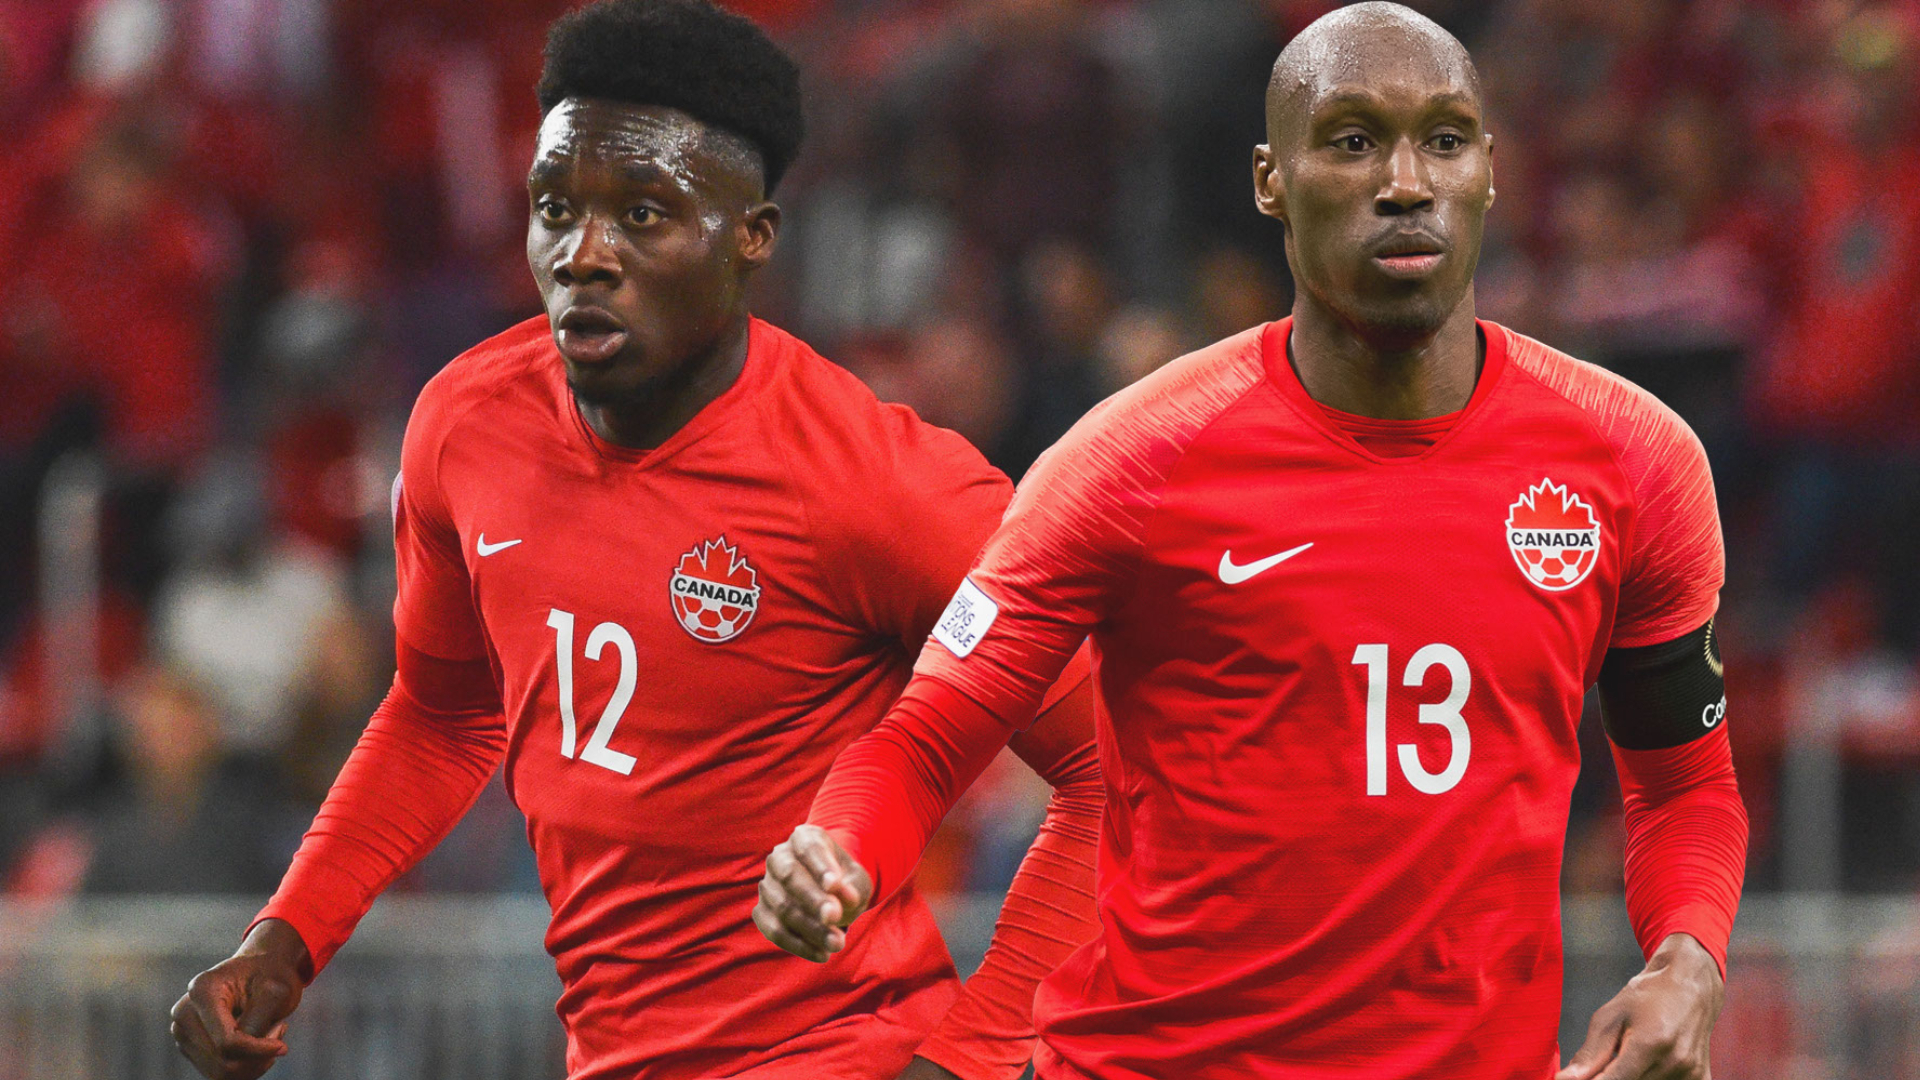 Here's what to expect from Canada's first game in the FIFA World Cup